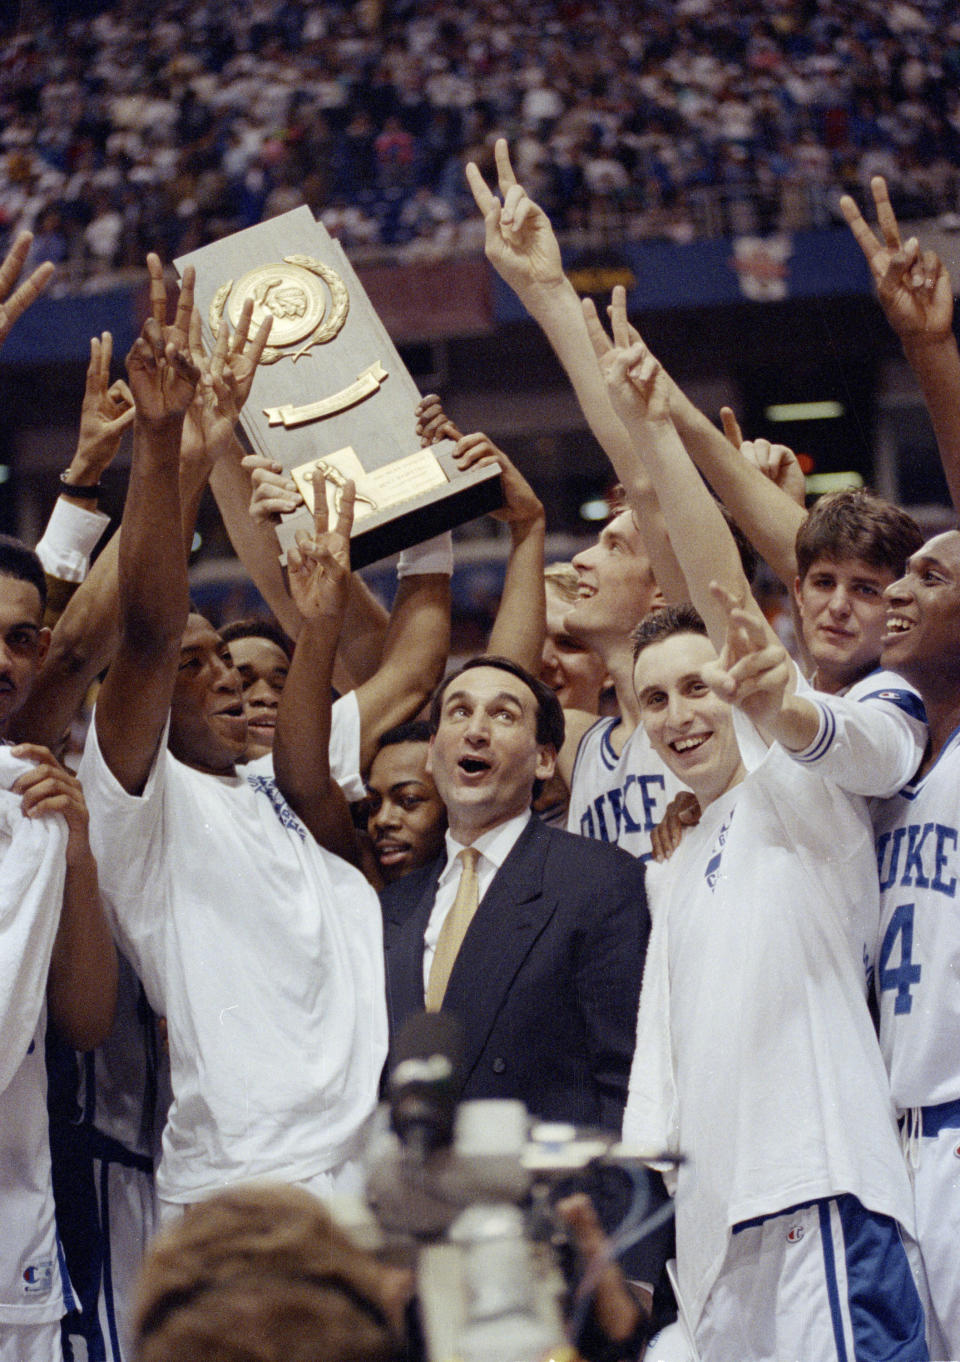 FILE - Duke coach Mike Krzyzewski and his team celebrate after defeating Michigan 71-51 in the NCAA college basketball Final Four championship game in Minneapolis, April 7, 1992. (AP Photo/Jim Mone, File)